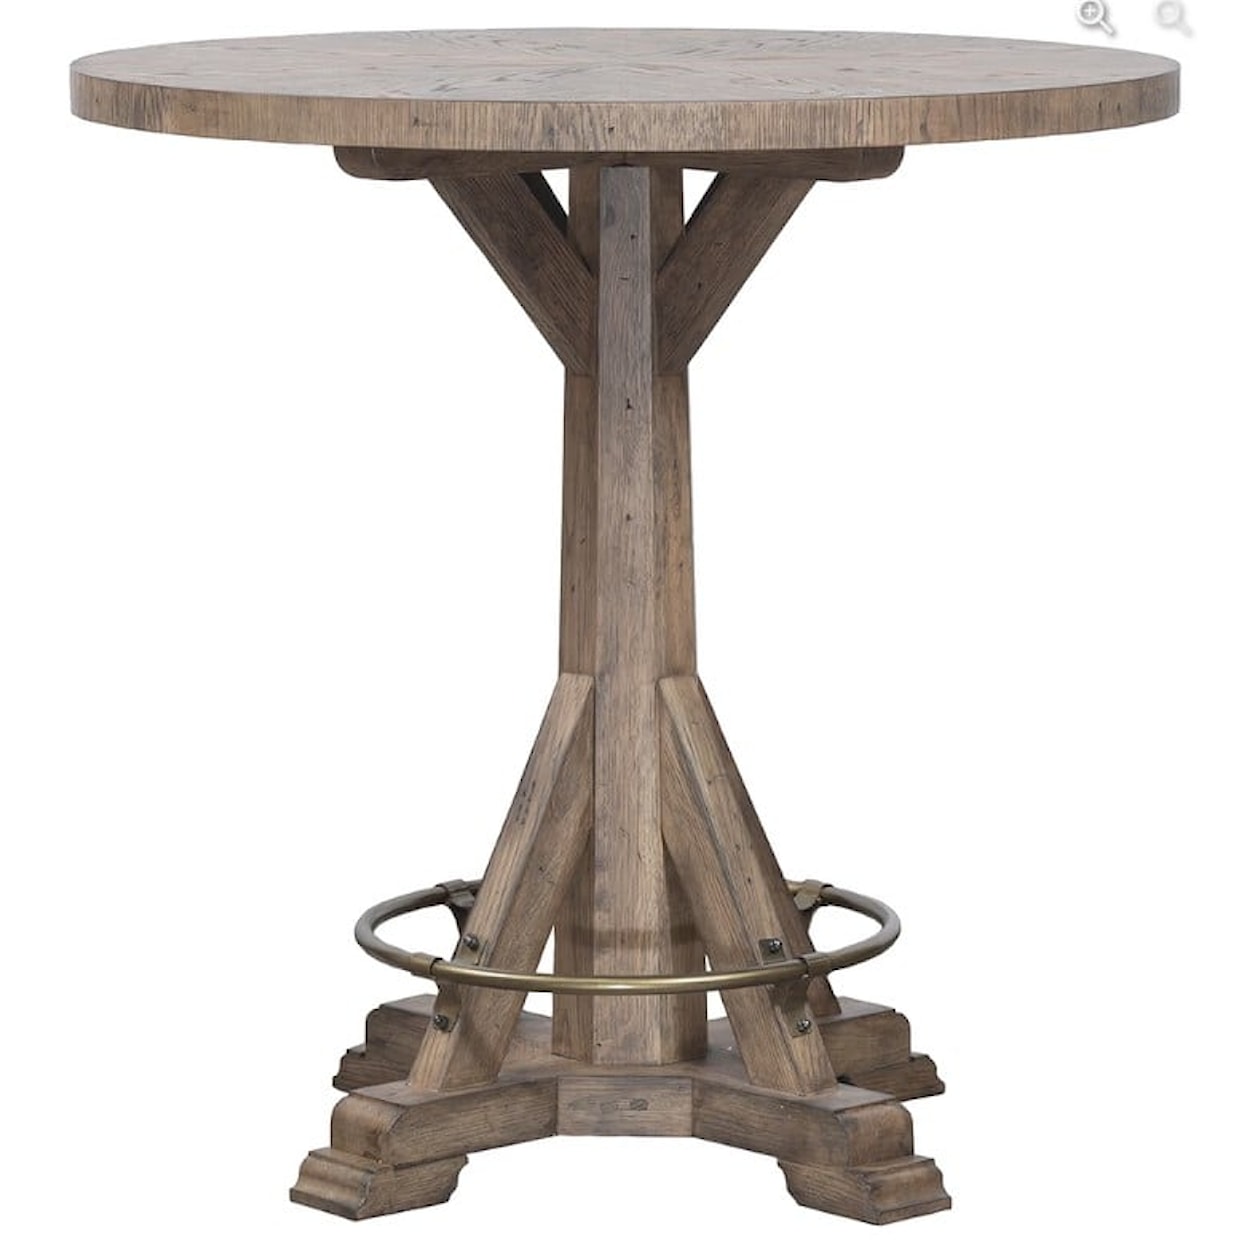 Fairfield Arcadian Collection Arcadian Round Bistro Table